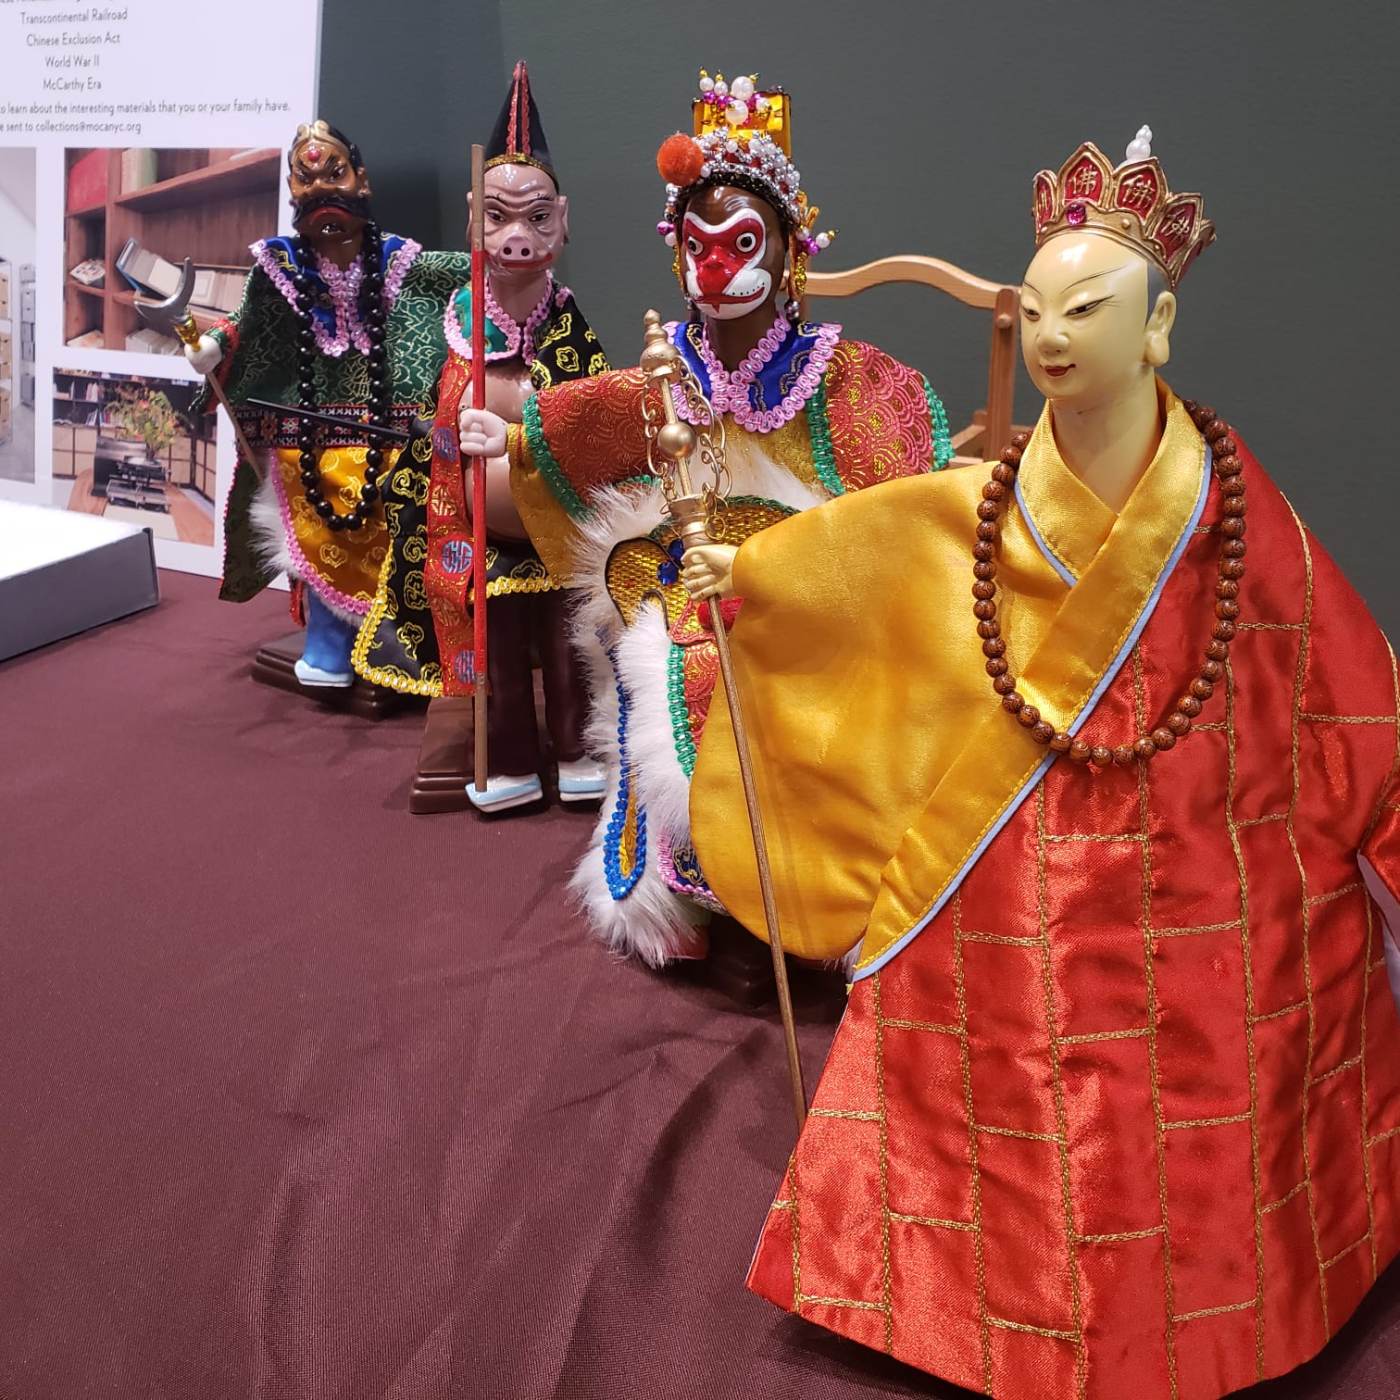 Journey to the West glove puppets. Courtesy of Steven Yungyuan Chang, Museum of Chinese in America (MOCA) Collection.